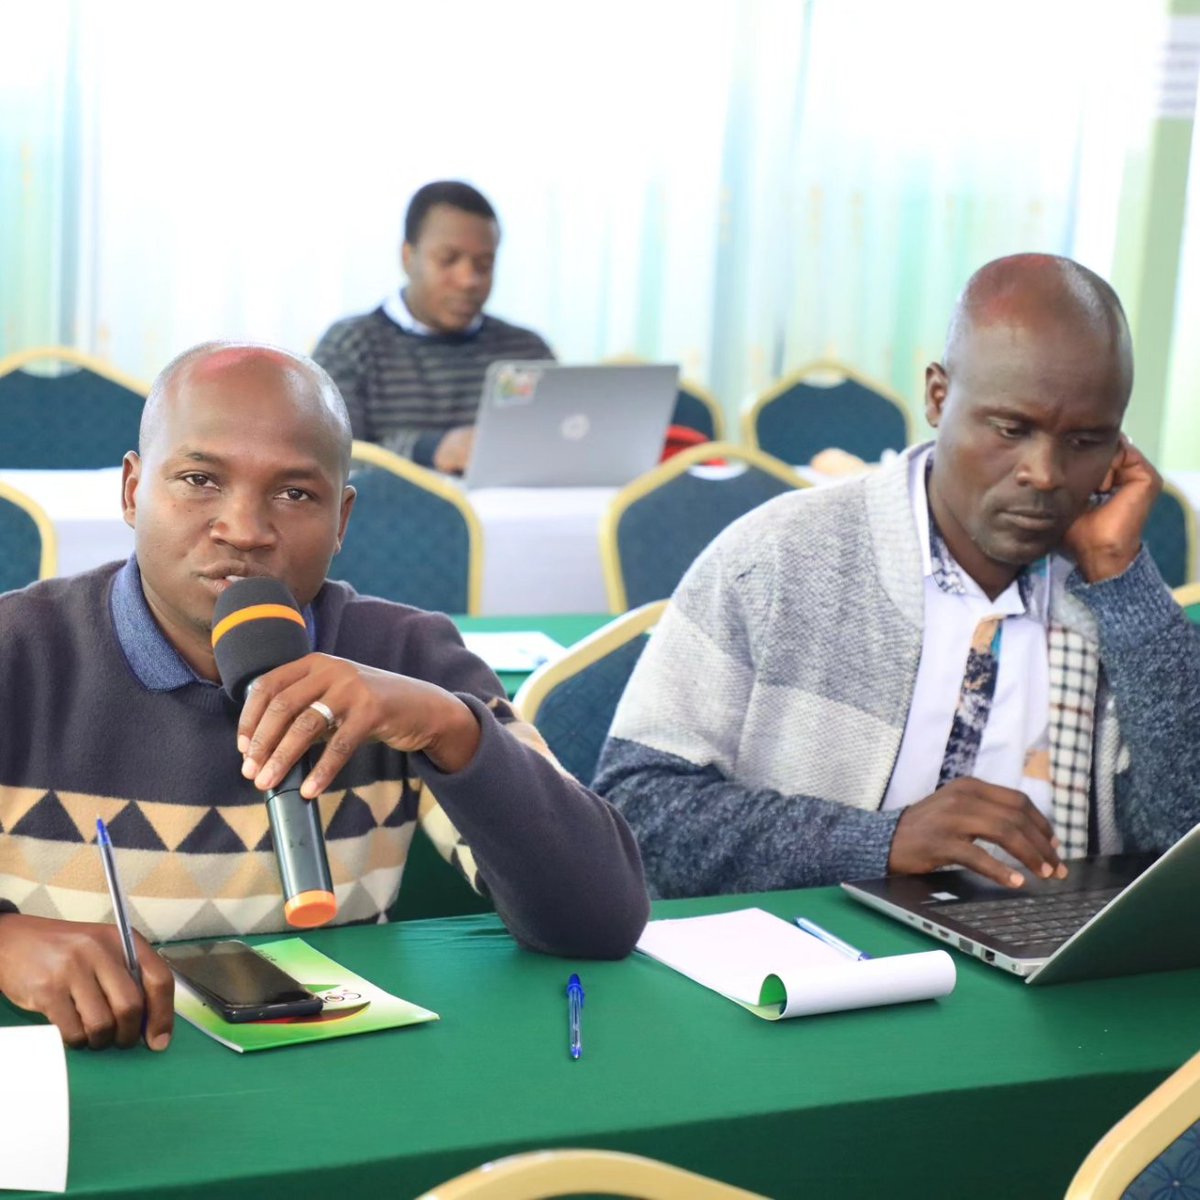 The training, which is sponsored by Financing Locally Led Climate Action (FLoCCA) program, brings together participants from West Pokot, Elgeyo Marakwet, Trans Nzoia, Turkana, Baringo, Nandi and Kisumu Counties.